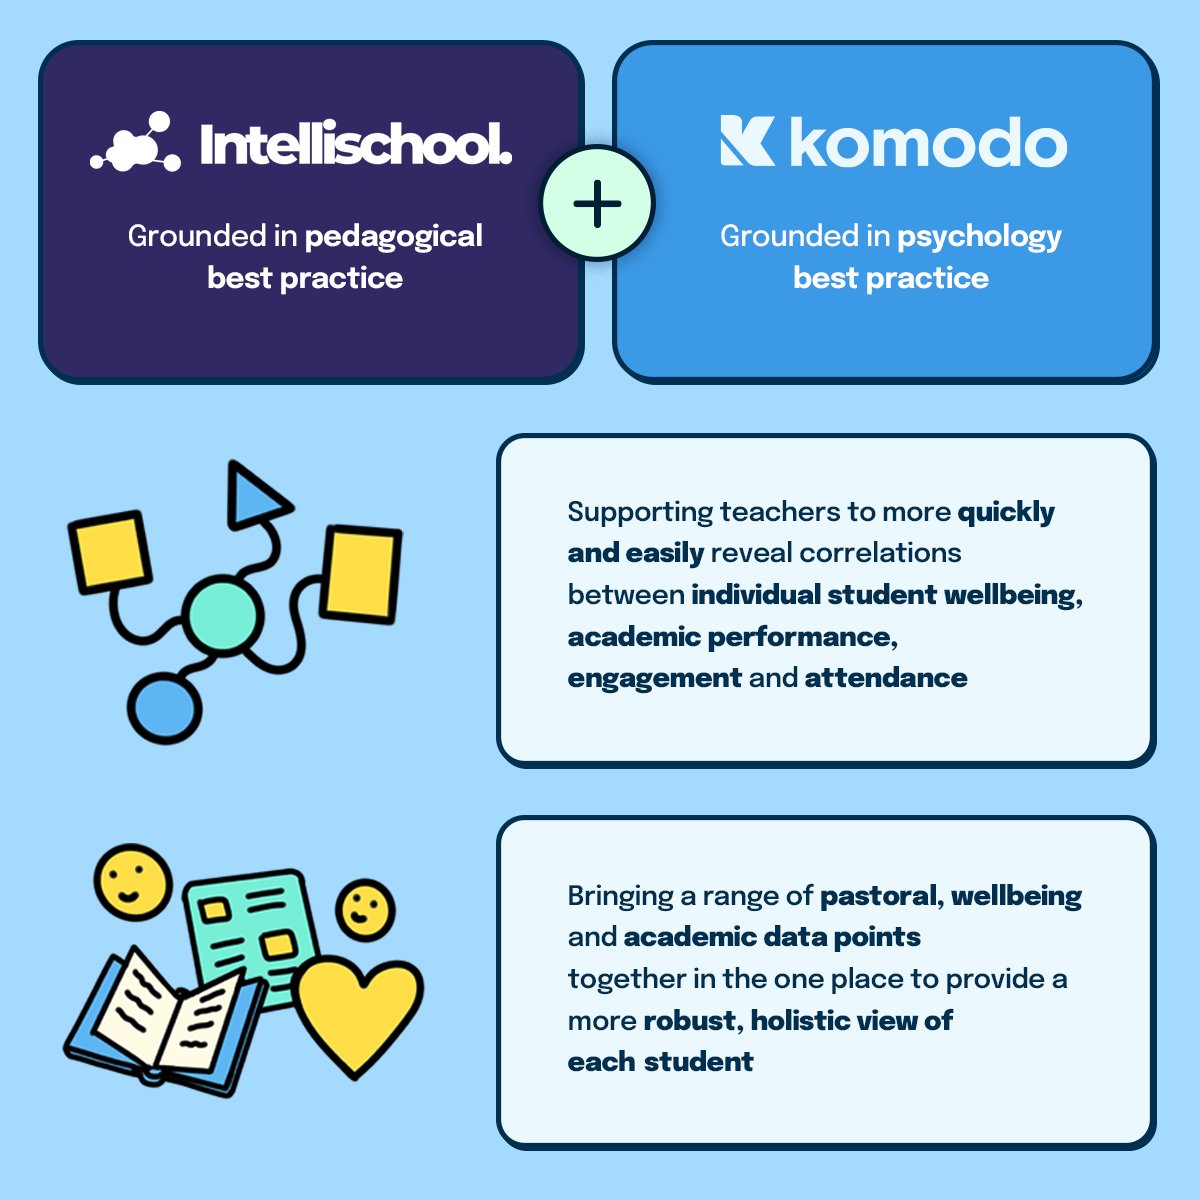 📣⭐ We’re partnering with our friends at Komodo Wellbeing! We’ll be combining academic, pastoral and wellbeing data to support schools 💫 intls.cl/432x1Qx

#komodowellbeing #intellischool #studentdata #studentwellbeing #learninganalytics #wellbeing #studentgrowth #edtech